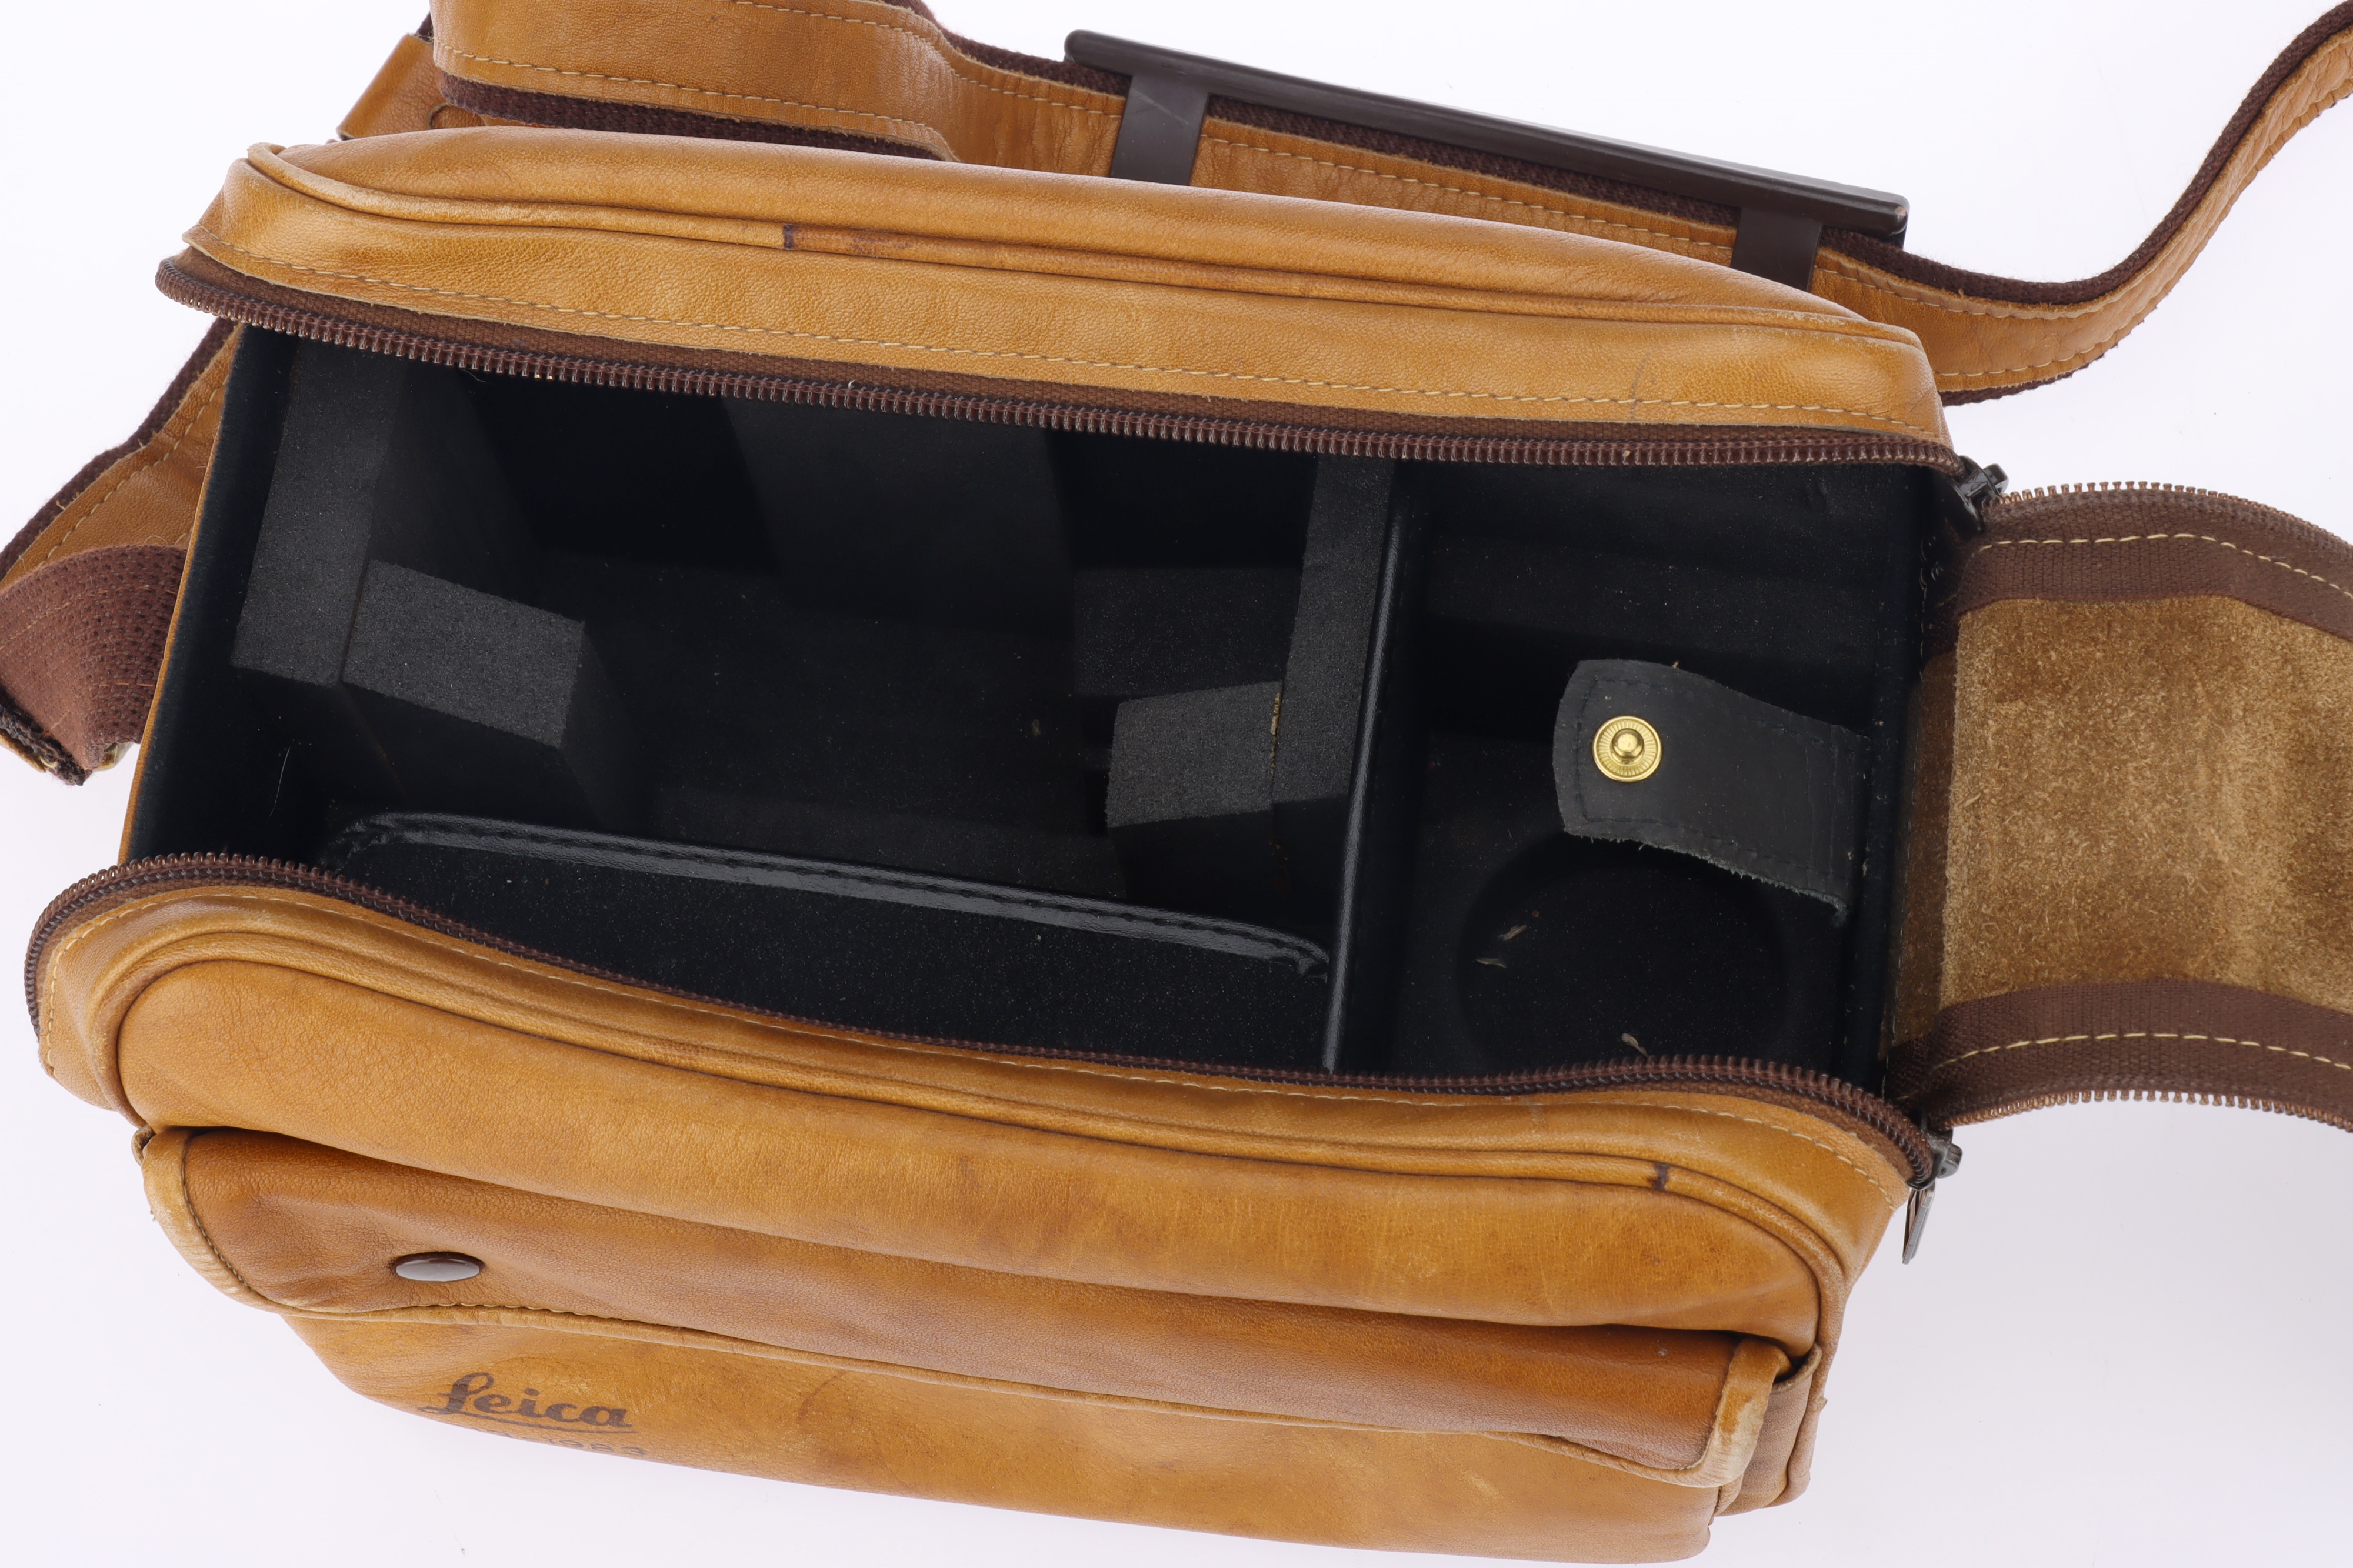 A Leitz Leica Camera Outfit Carry Case For Leica M-P Special Edition, - Image 3 of 4